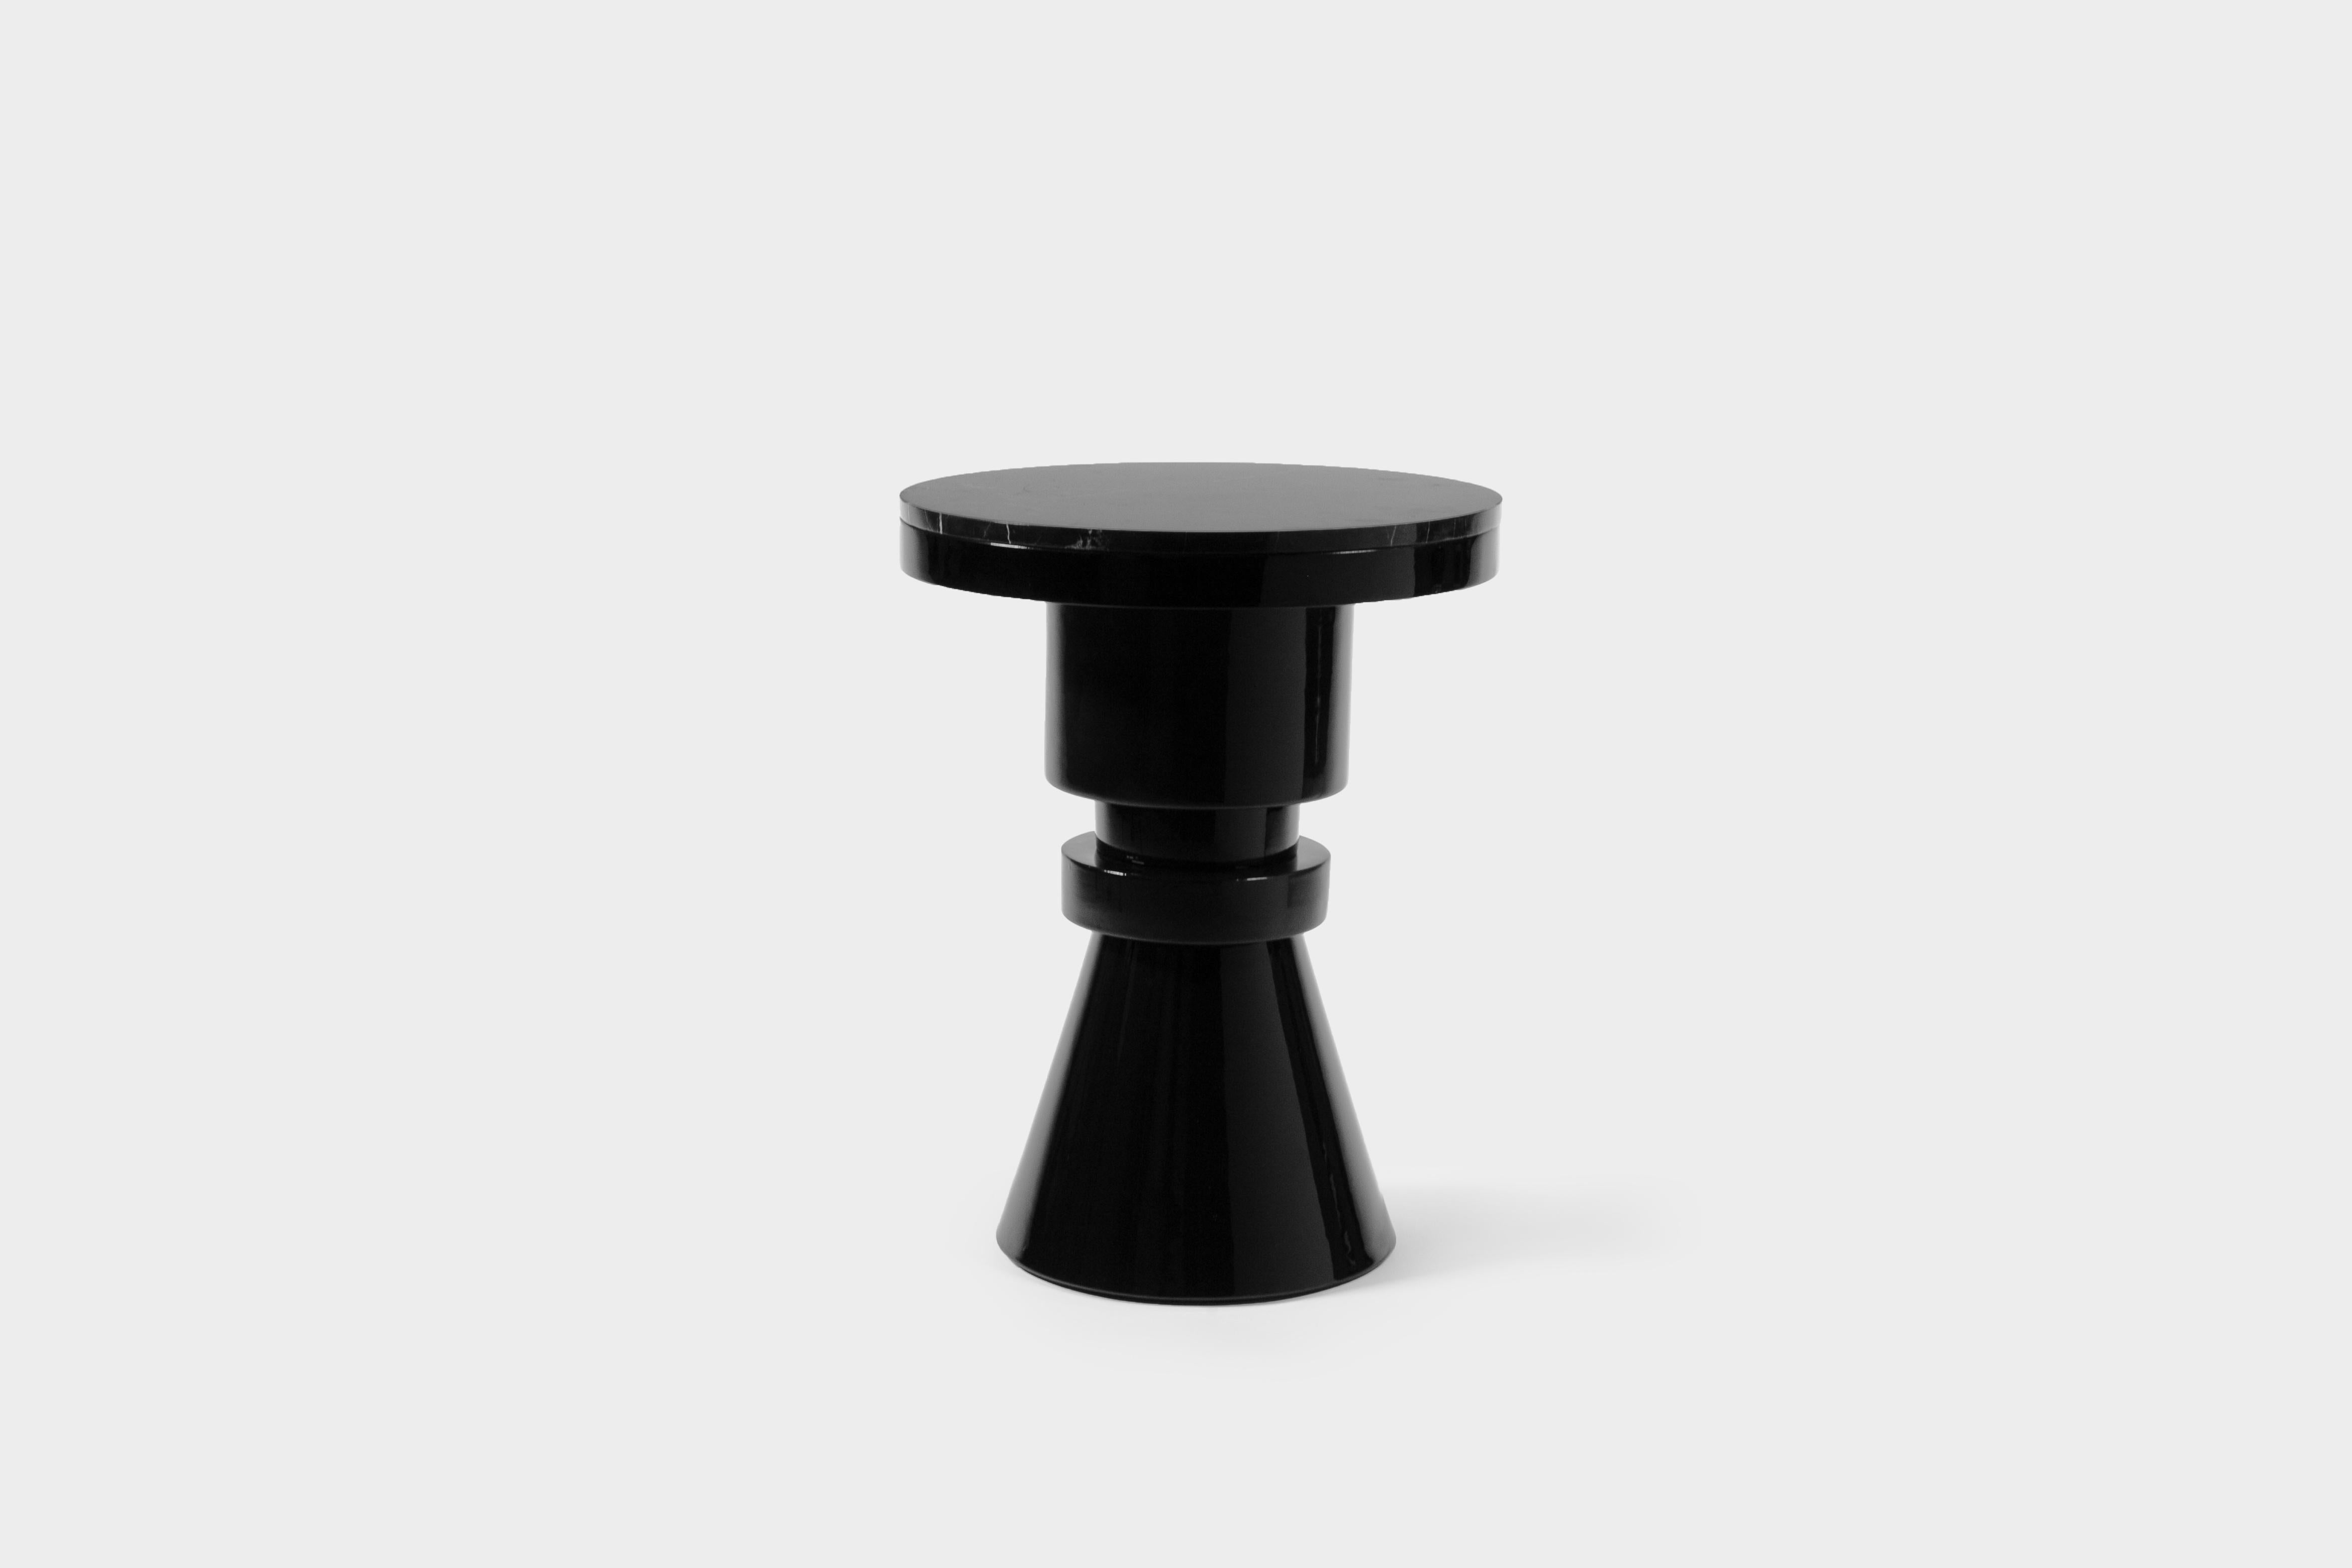 Ceramic and marble side table by Eric Willemart.
Materials: top: Polished Nero marquina marble plate embedded in a
black lacquered wooden tray
Body: handcrafted ceramic glazed in black
Base: black lacquered wood on an aluminum plate
Dimensions: